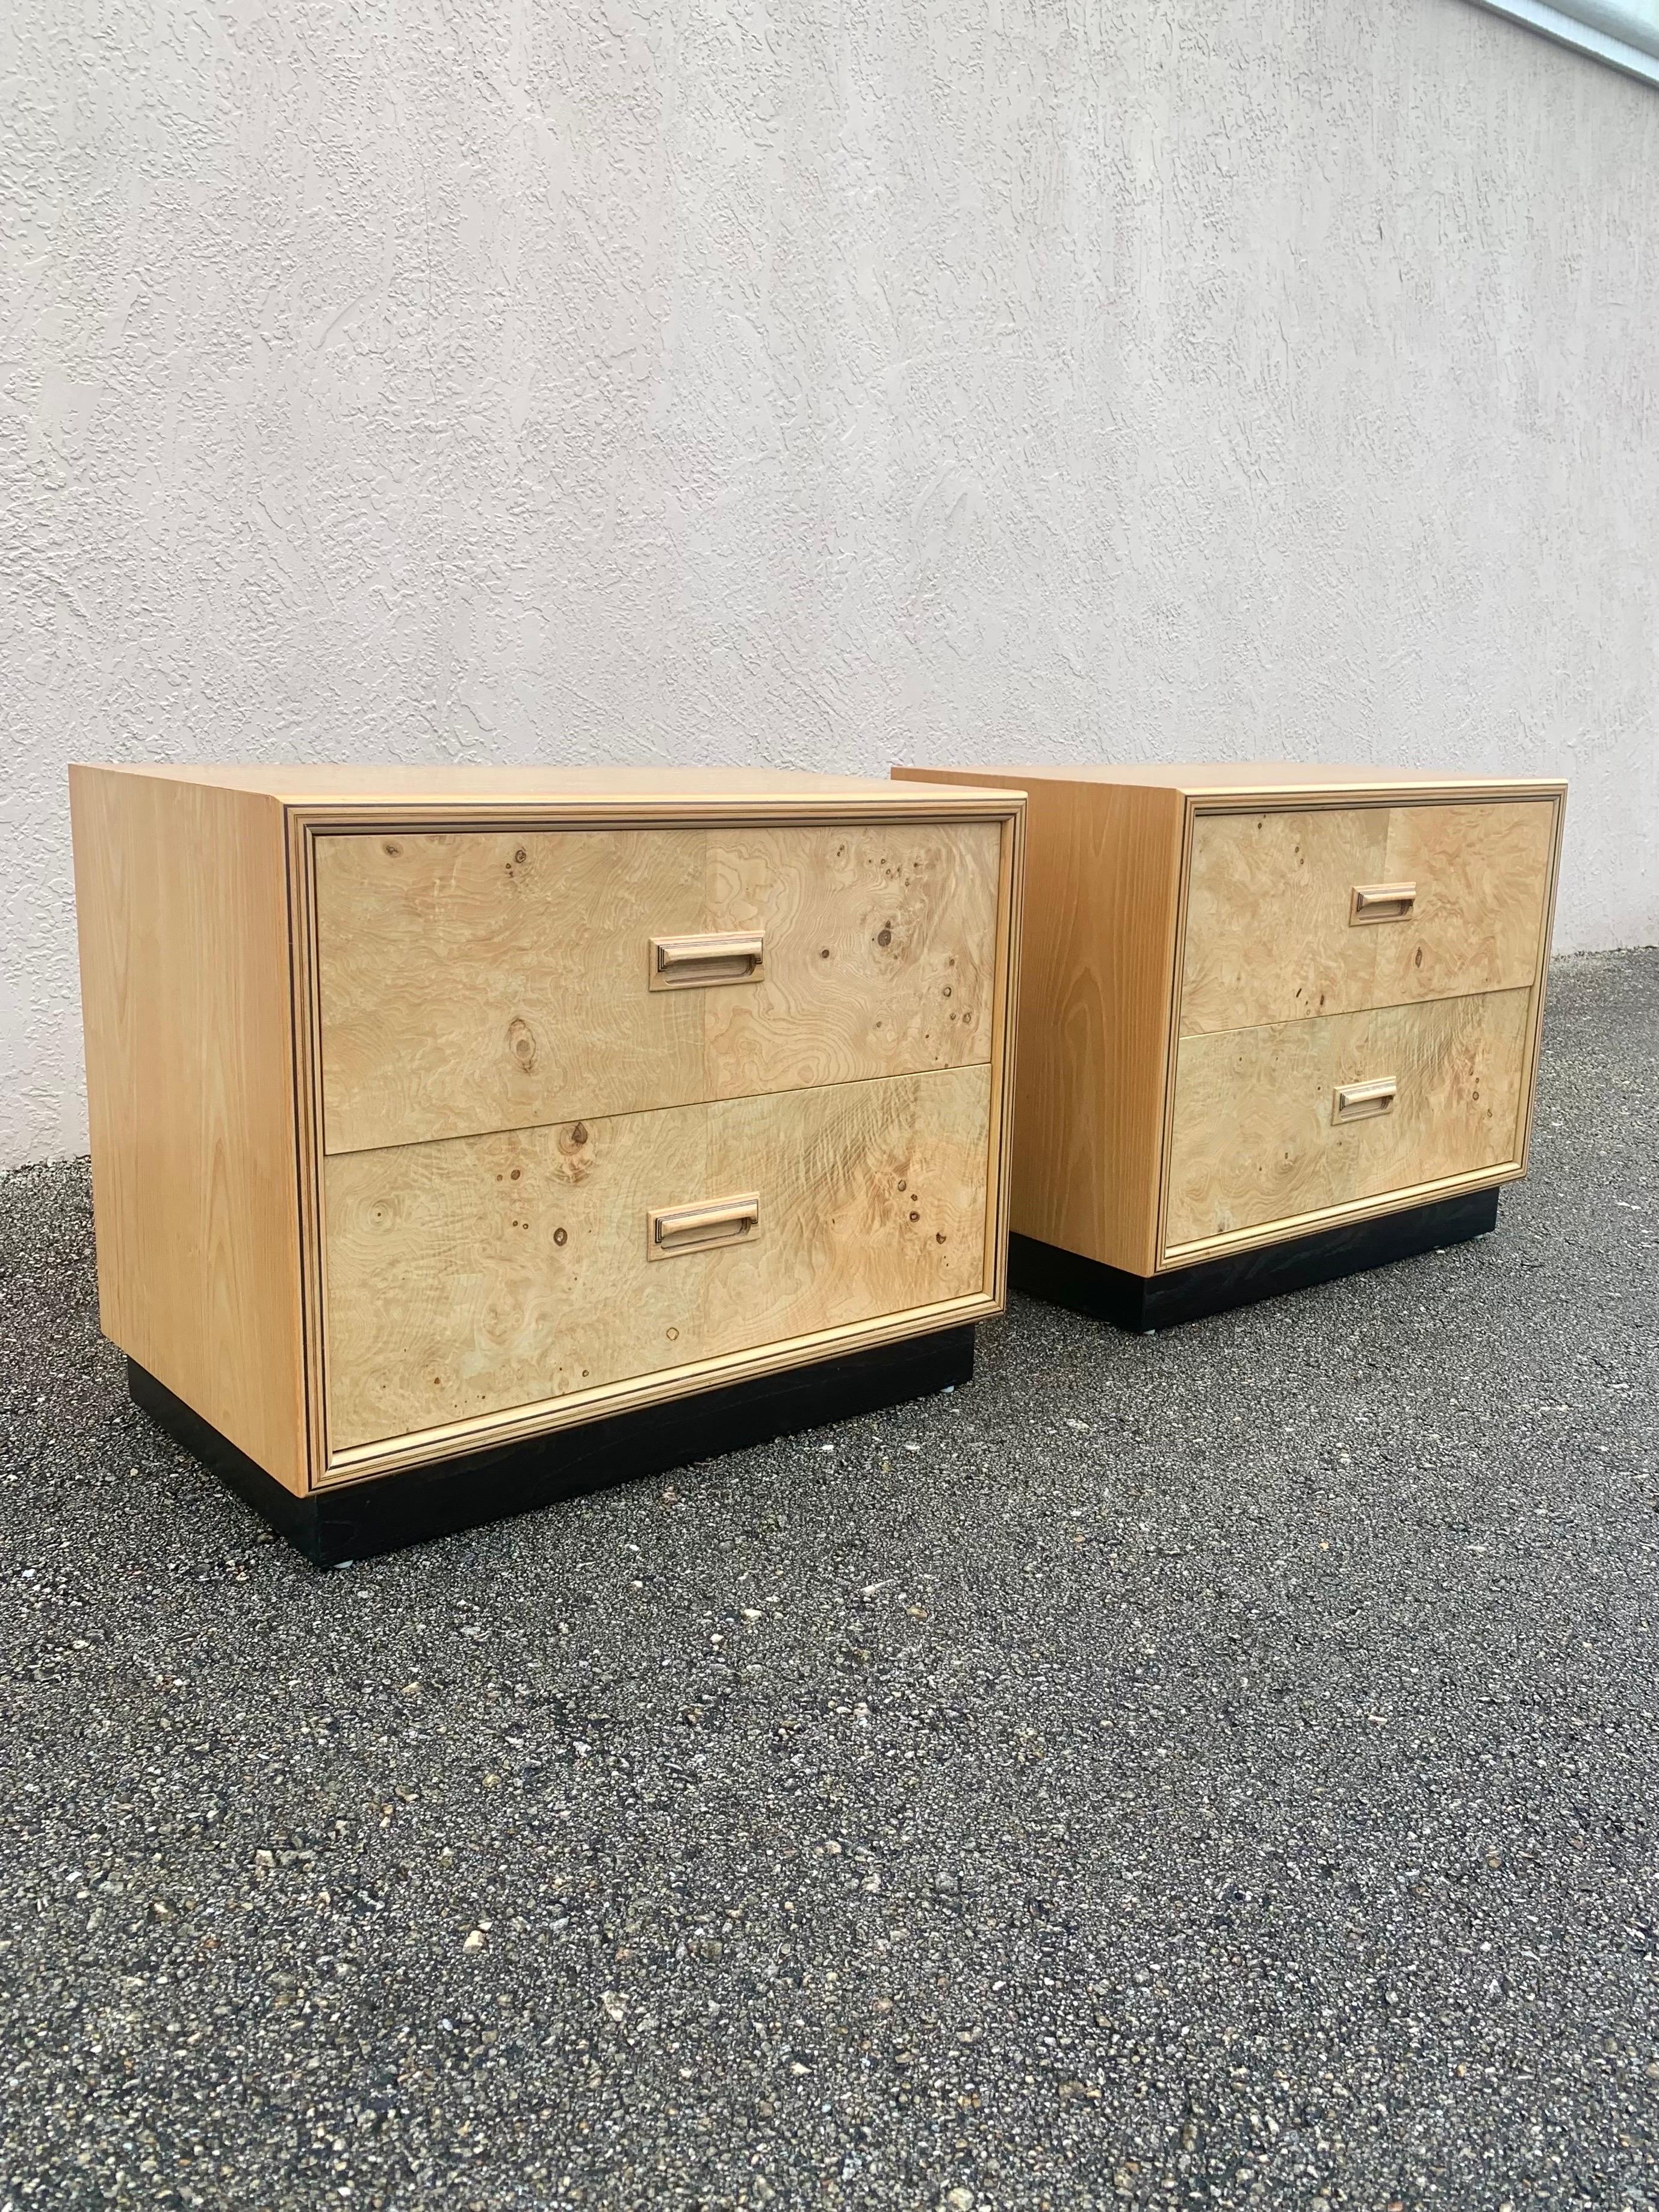 Exceptional pair of nightstands by Henredon for their Scene two line. 

Burped olive wood drawer fronts. Ebonized and ash wood studio made ply creating beautiful framing details. 

Ebonized plinth base. 

Made in the USA, circa 1980s. 

Design